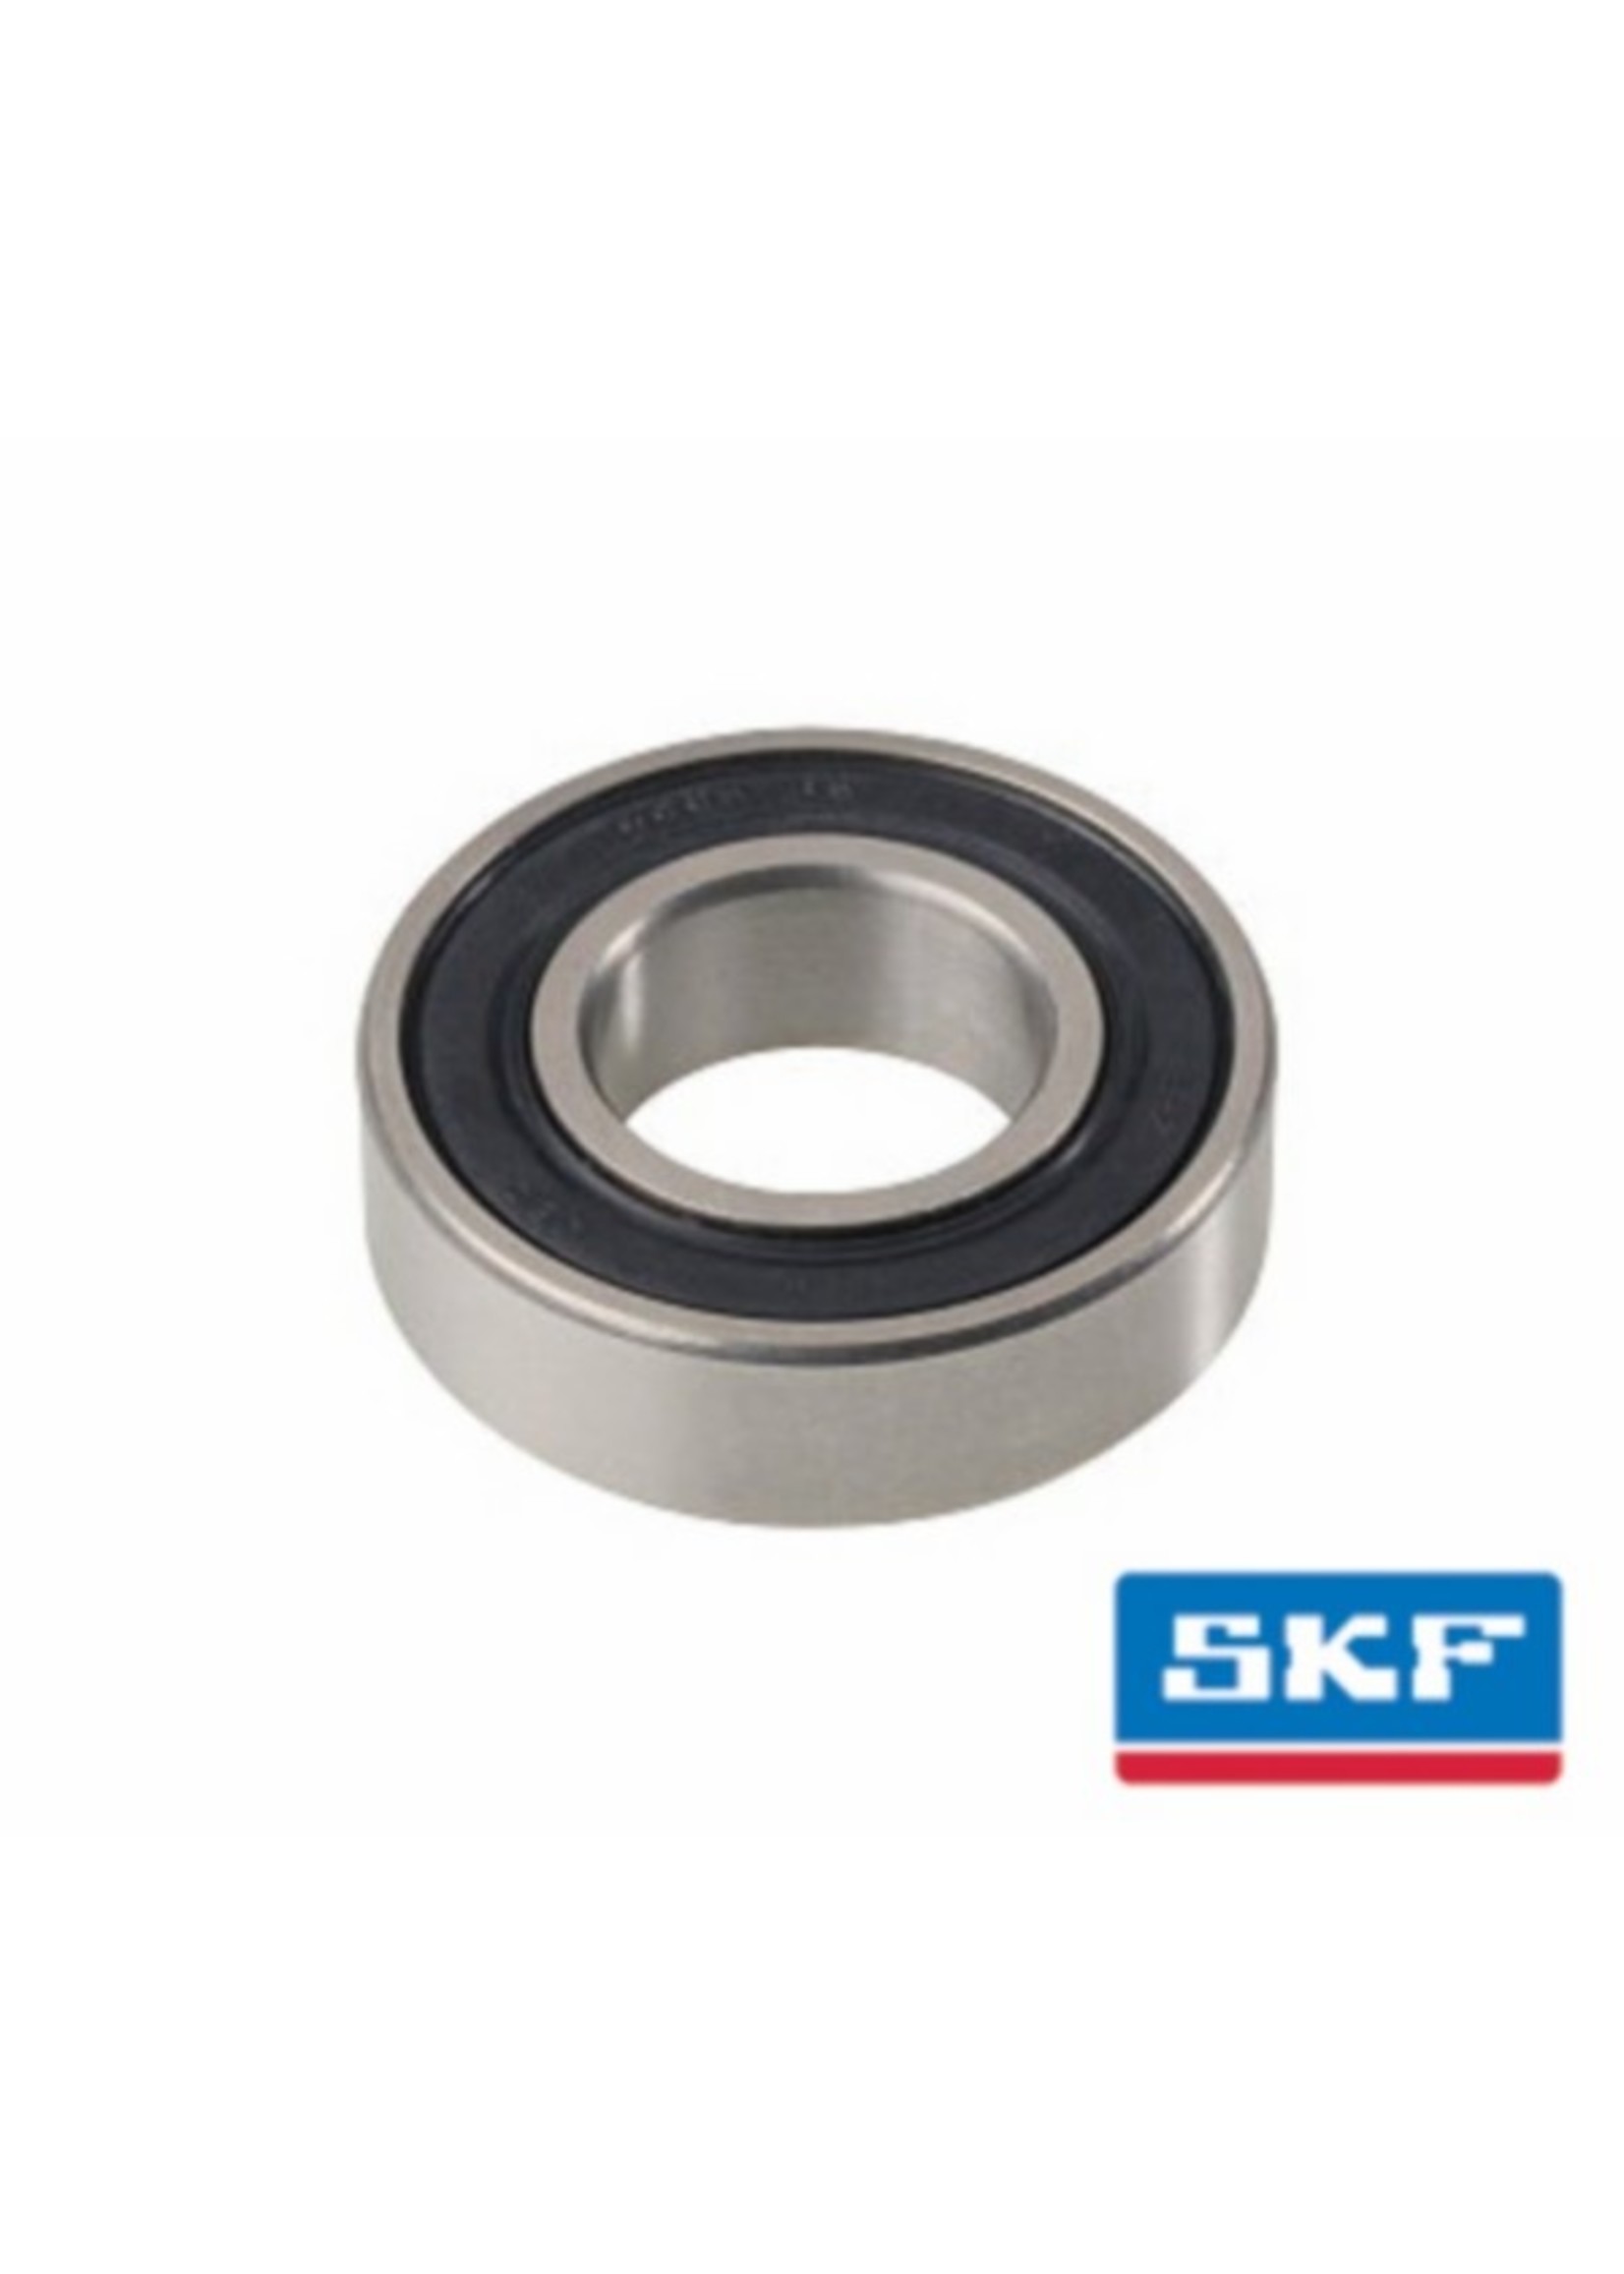 lagers lager 6204 2rs1 c4 20x47x14 skf